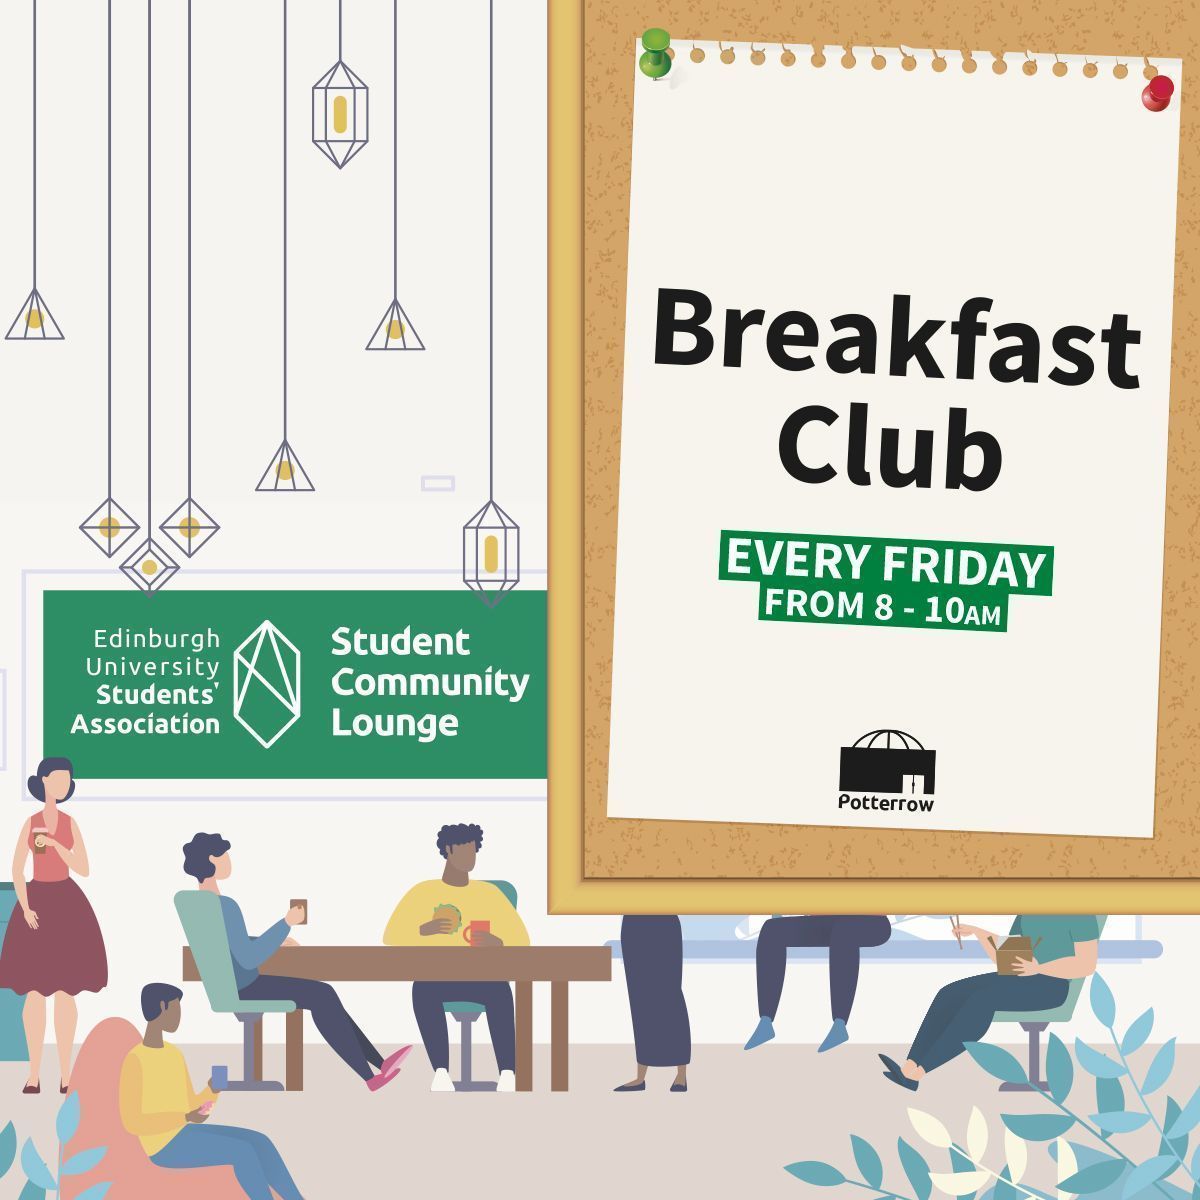 Don't miss your chance to grab a FREE breakfast! 🍞 Join us every Friday until Friday 24th May in the Student Community Lounge 8 - 10am. Kick-start your day with breakfast on us ☕